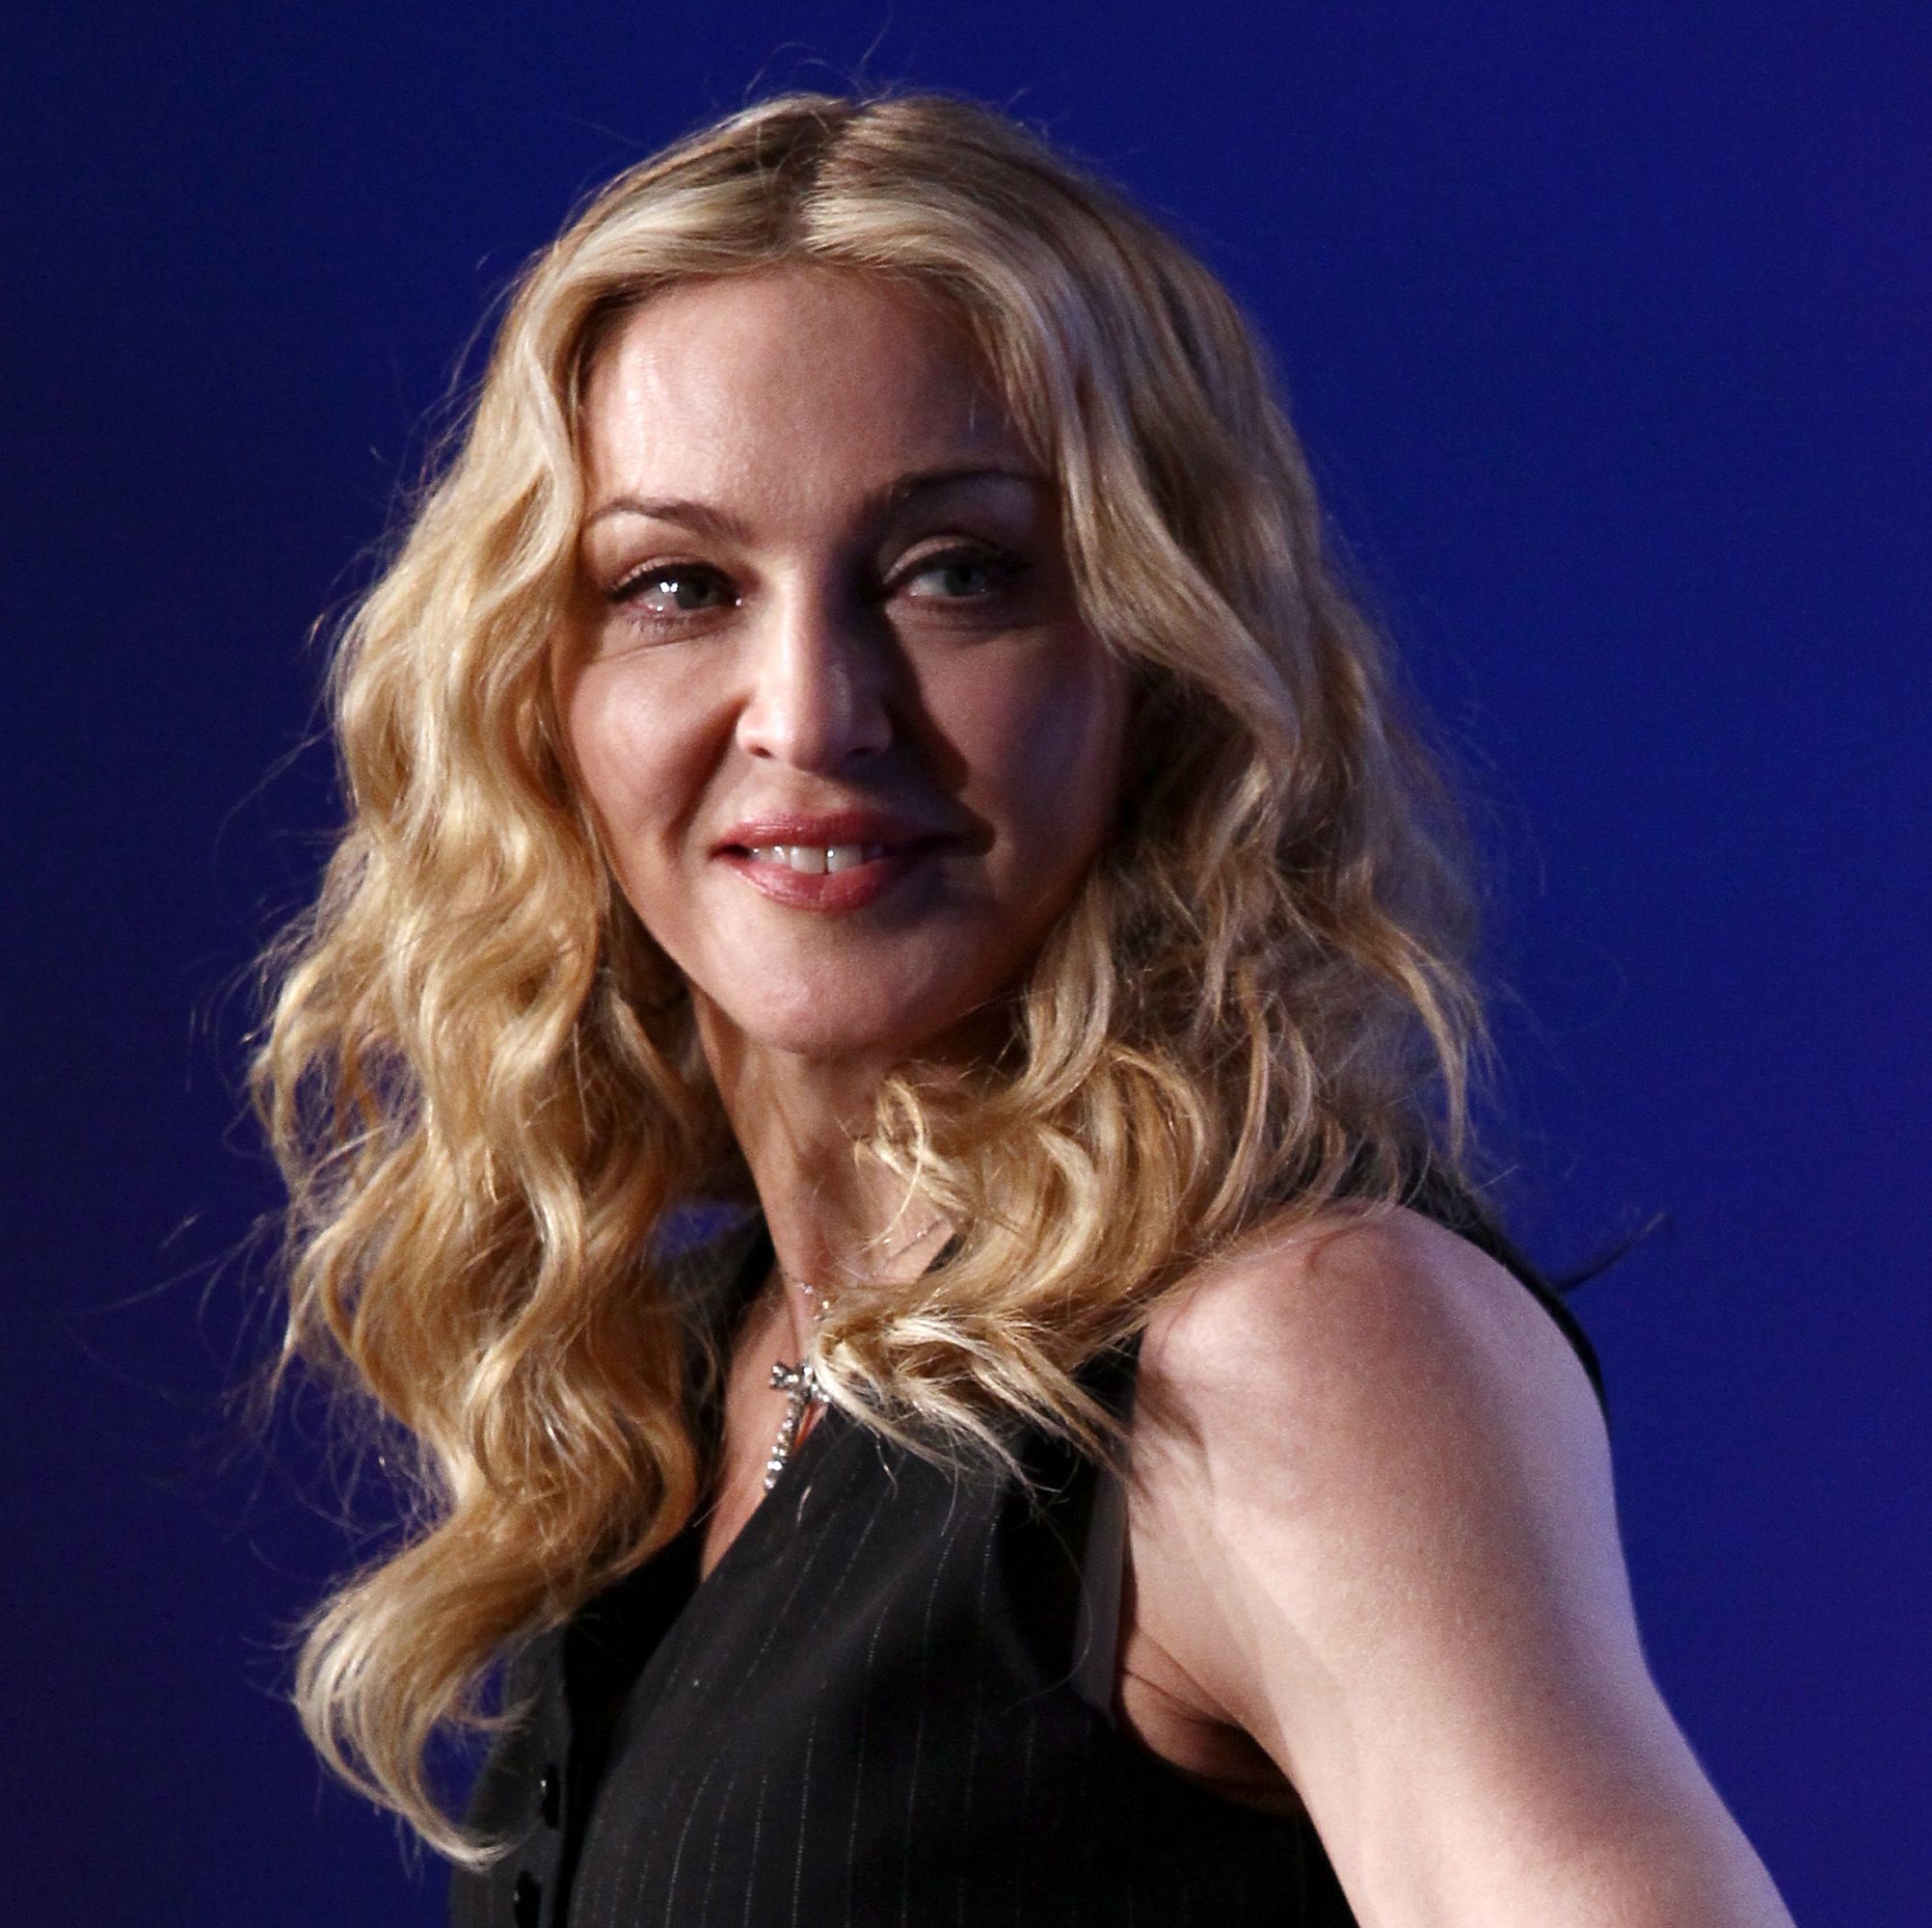 Three Major Young Actresses Are Competing to Play Madonna In a New Biopic